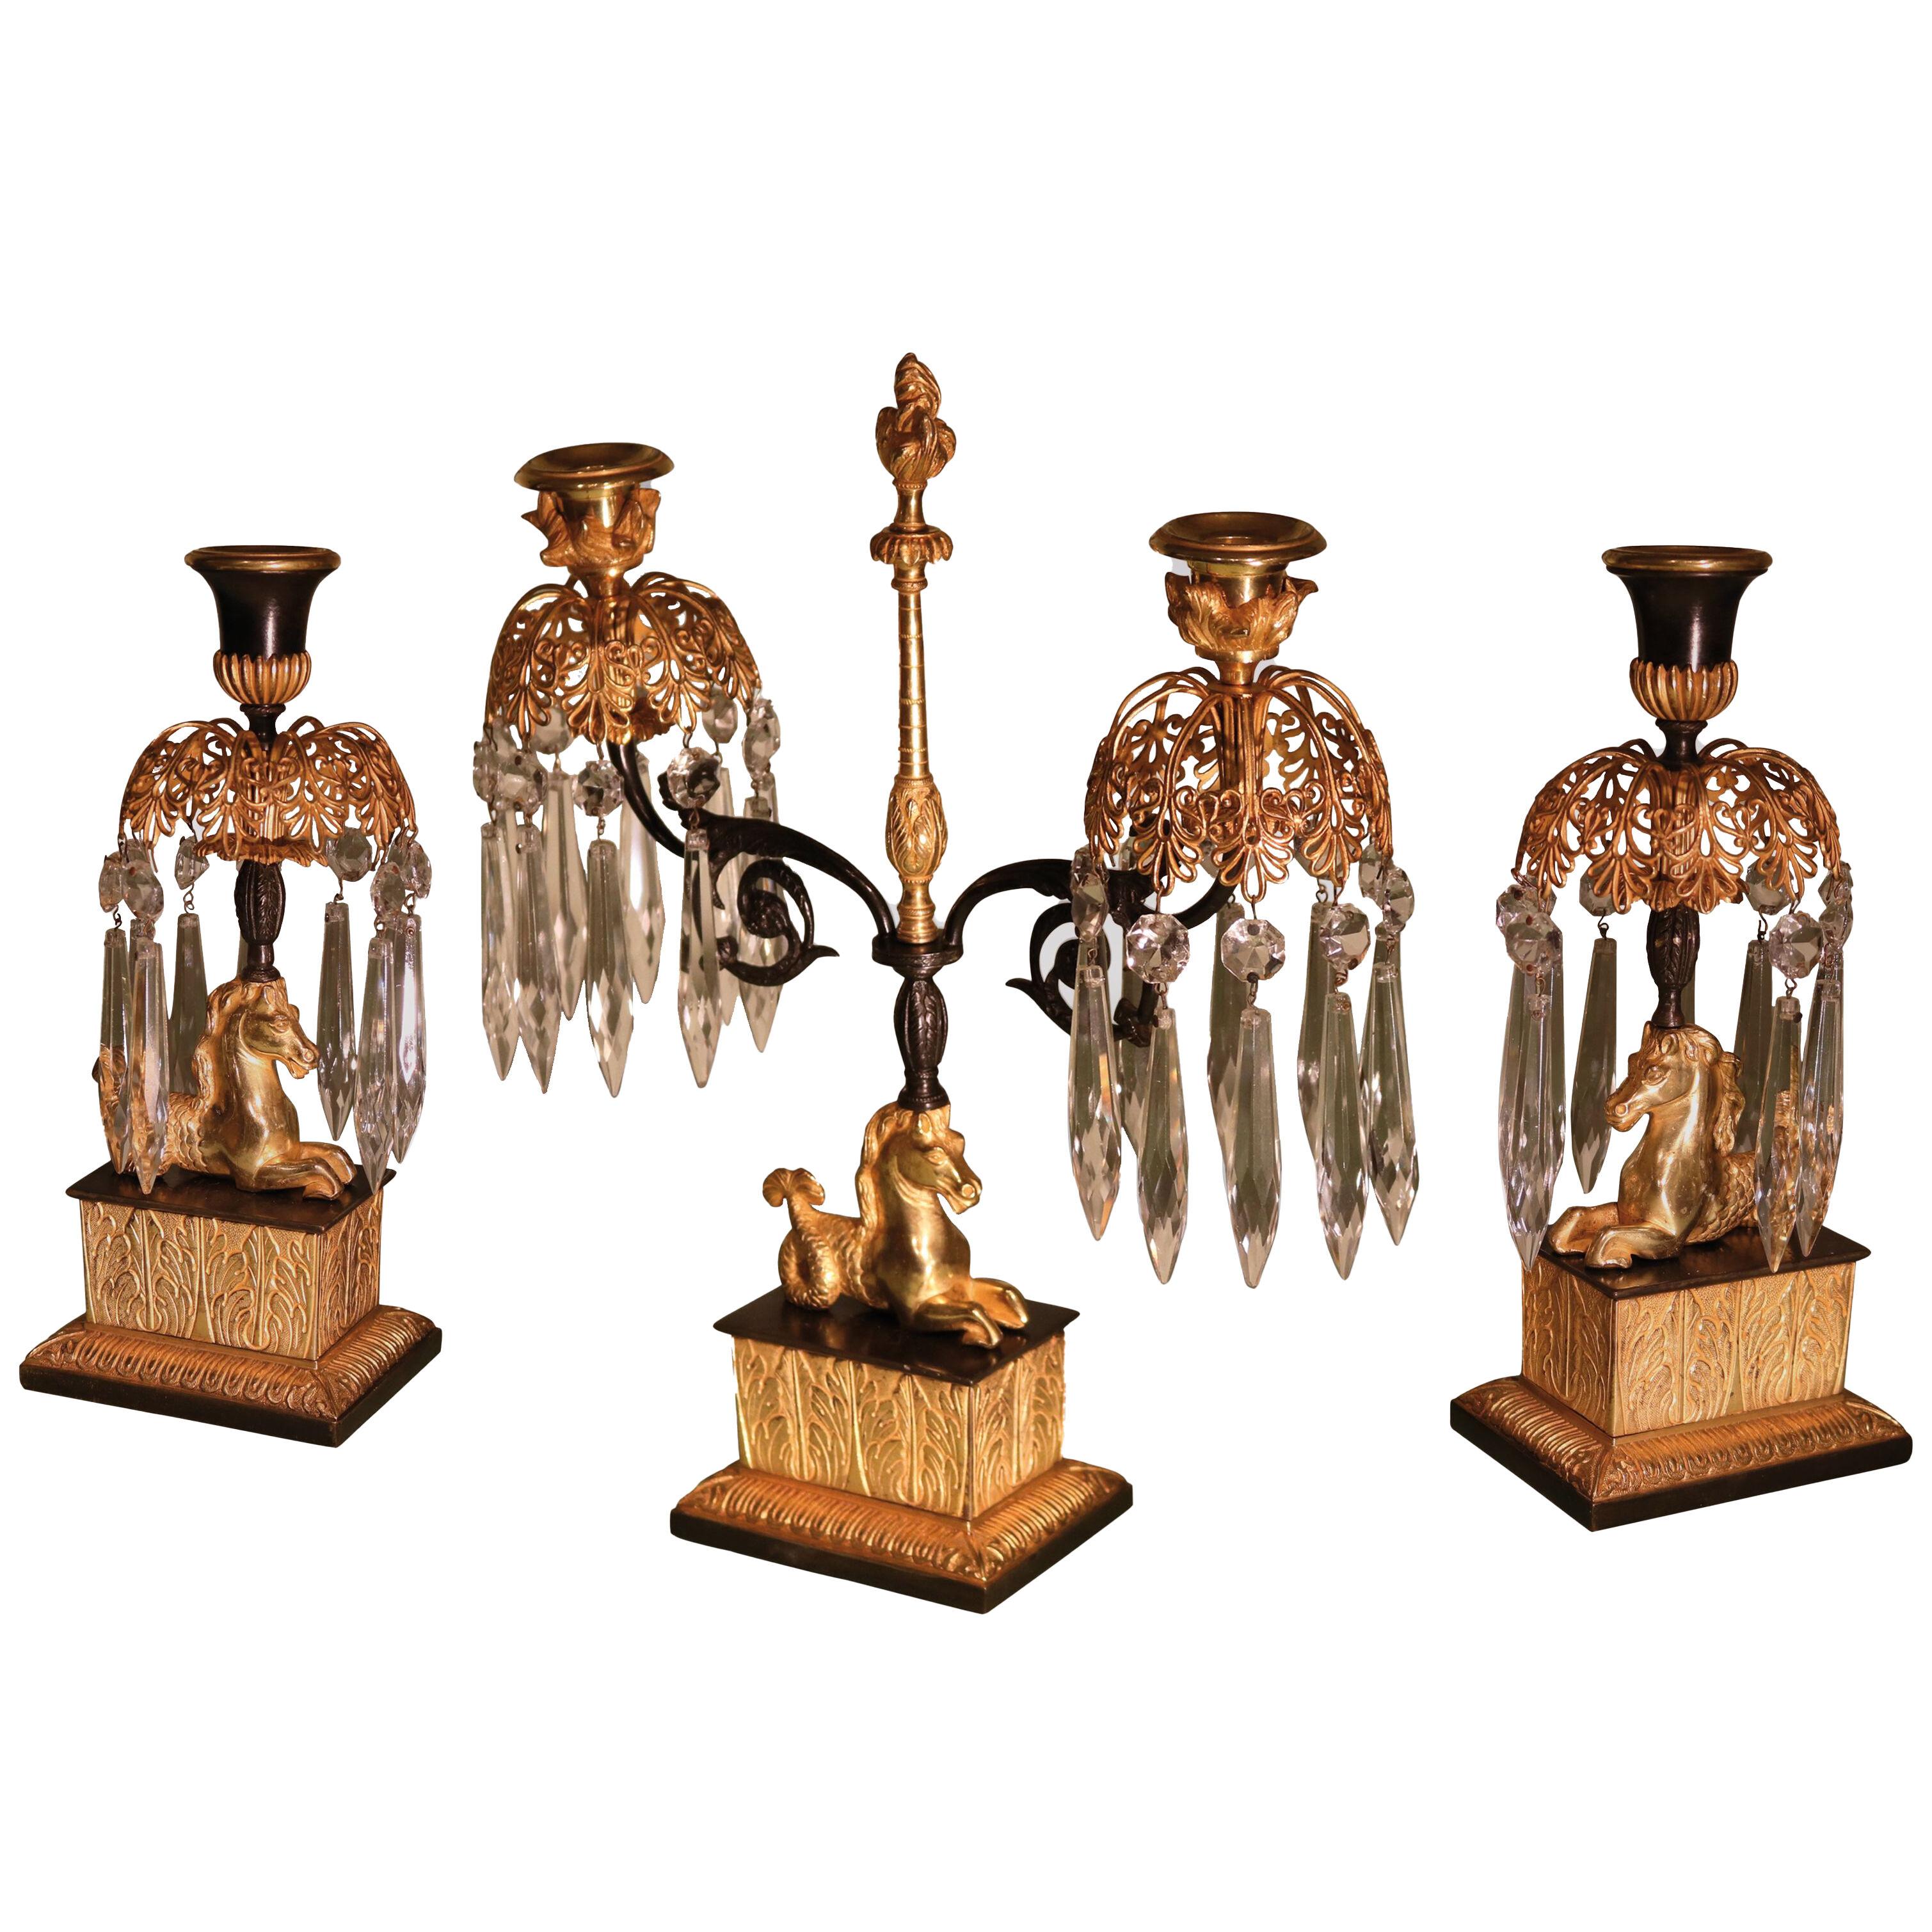 A set of early 19th century bronze and ormolu lustre candlesticks